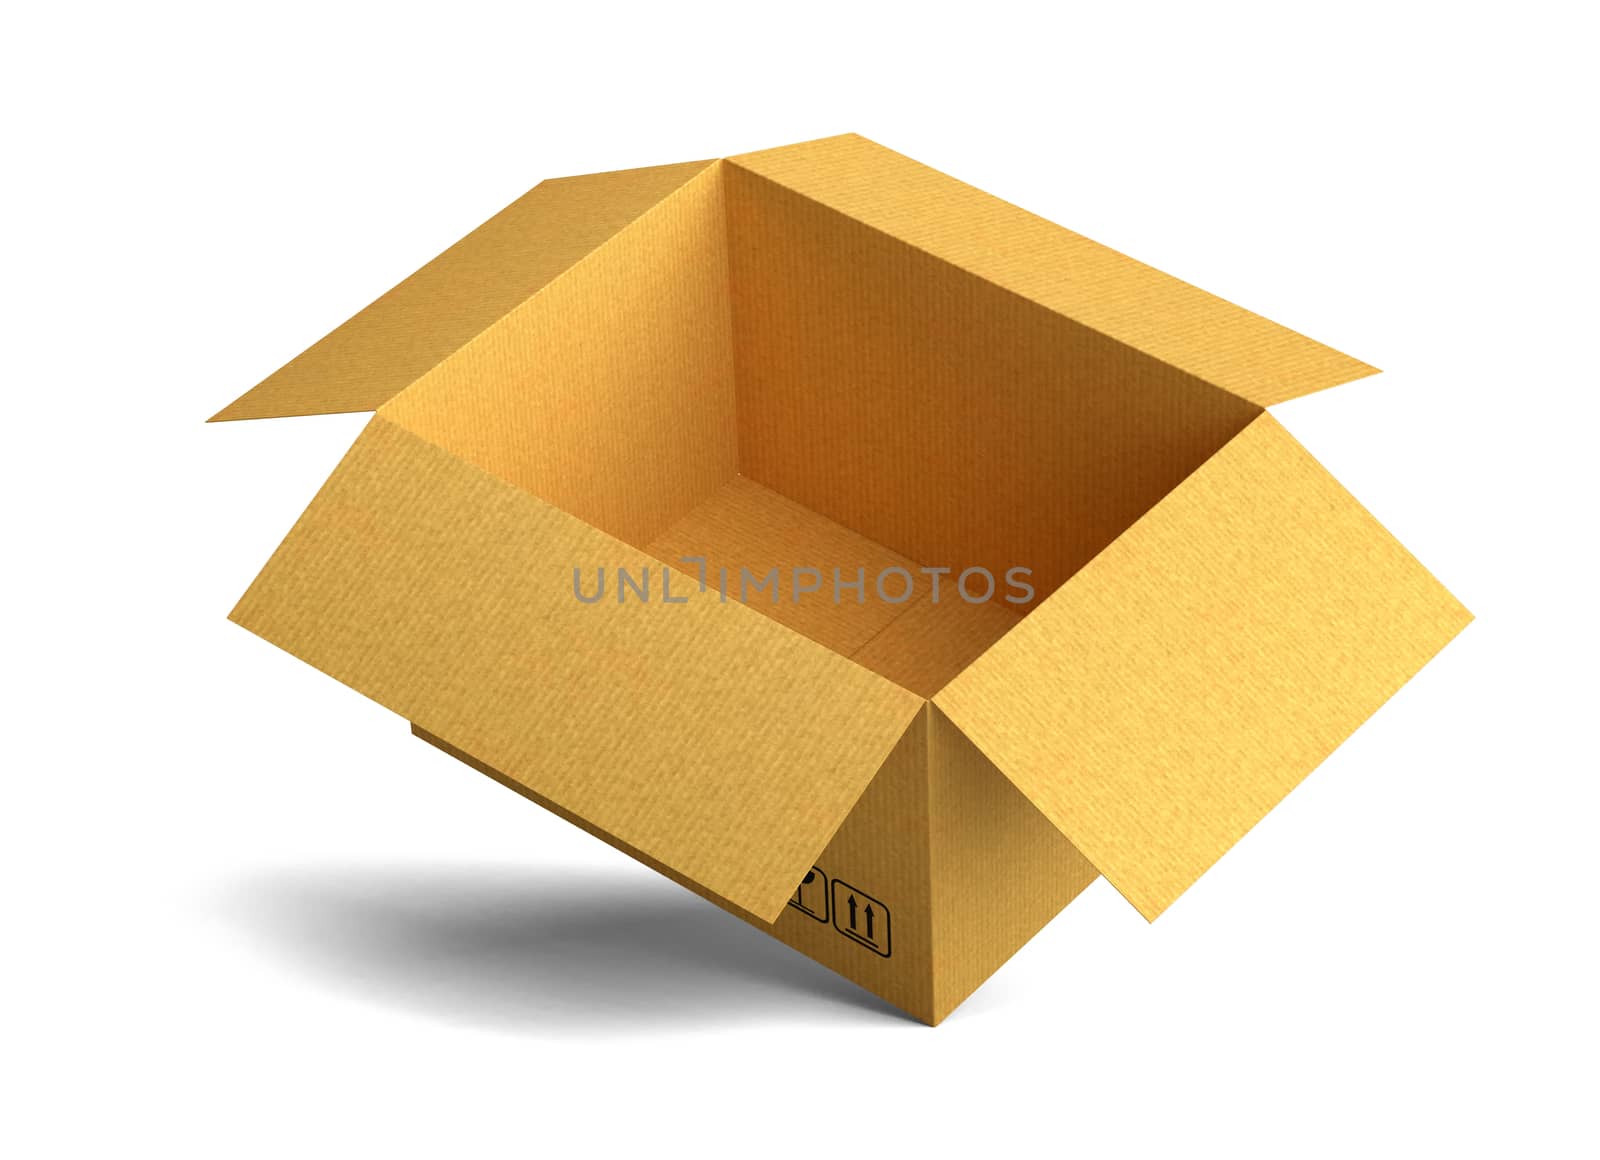 The open empty packing carton box stands on the corner. Isolated on white background. 3D illustration